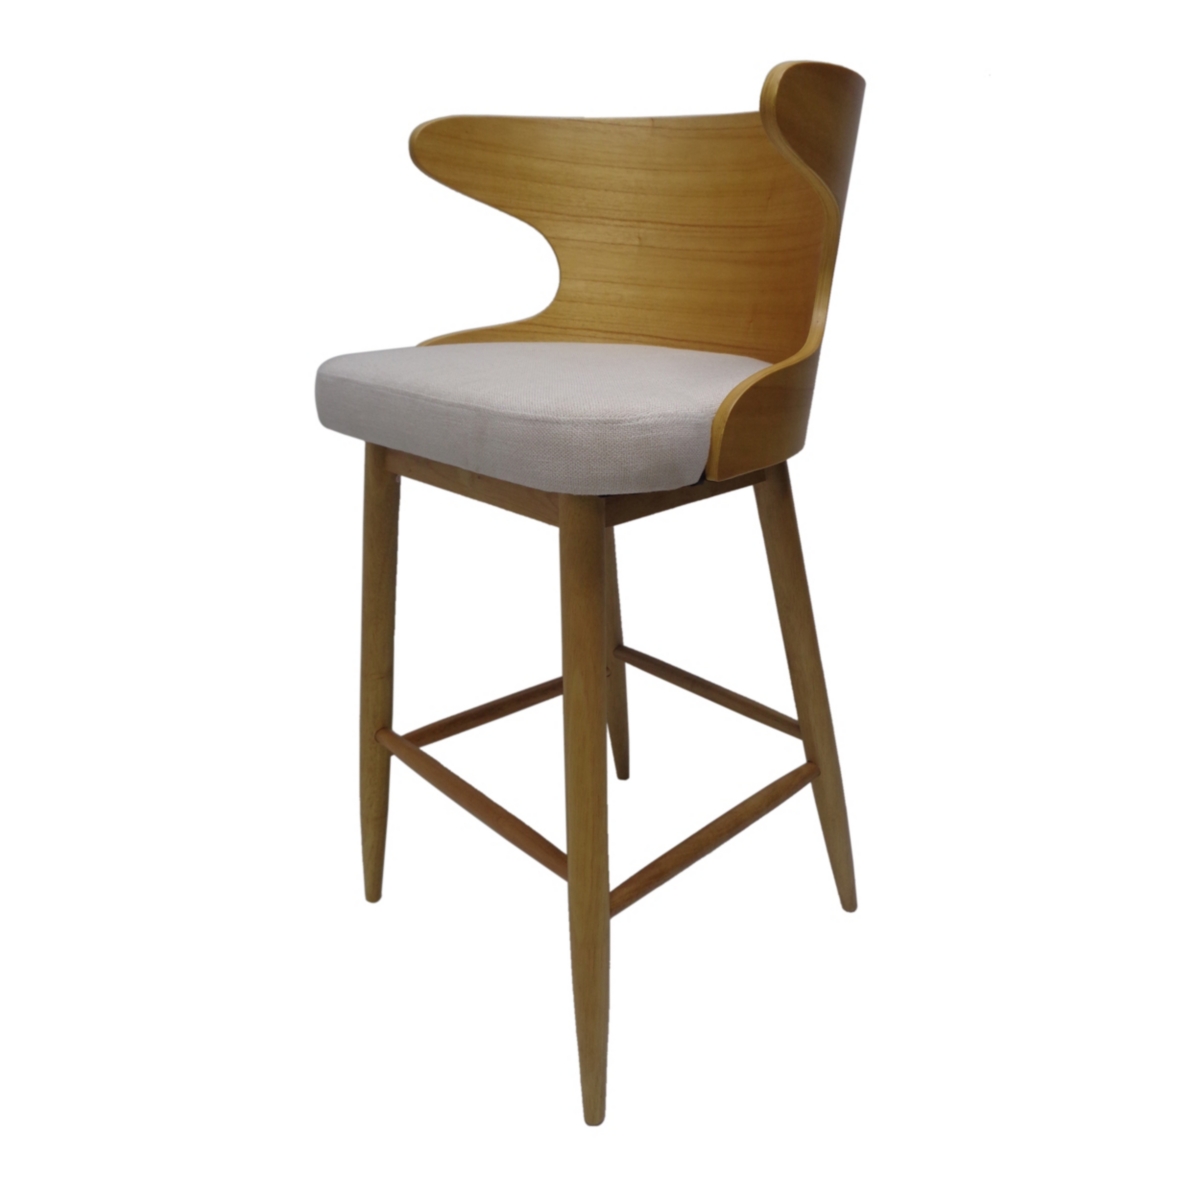 Noble House Kamryn Mid Century Modern Fabric Barstools Set Of 2, Light Beige In Charcoal